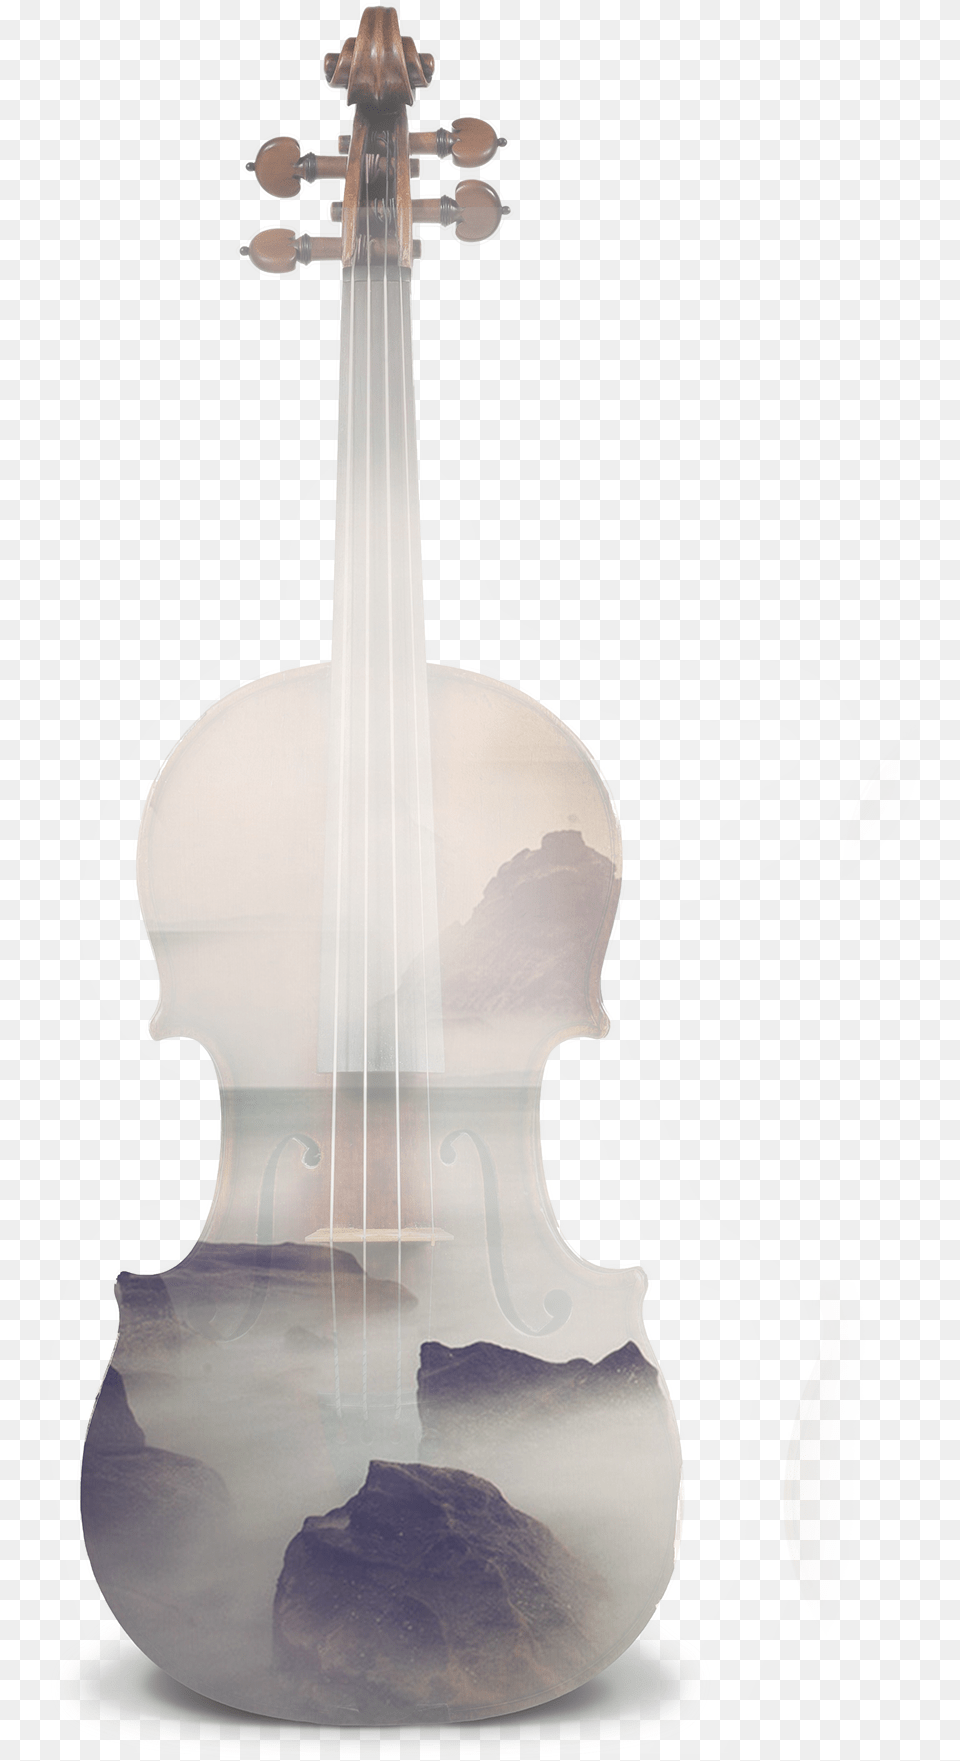 Violin, Musical Instrument, Guitar, Cello Free Png Download